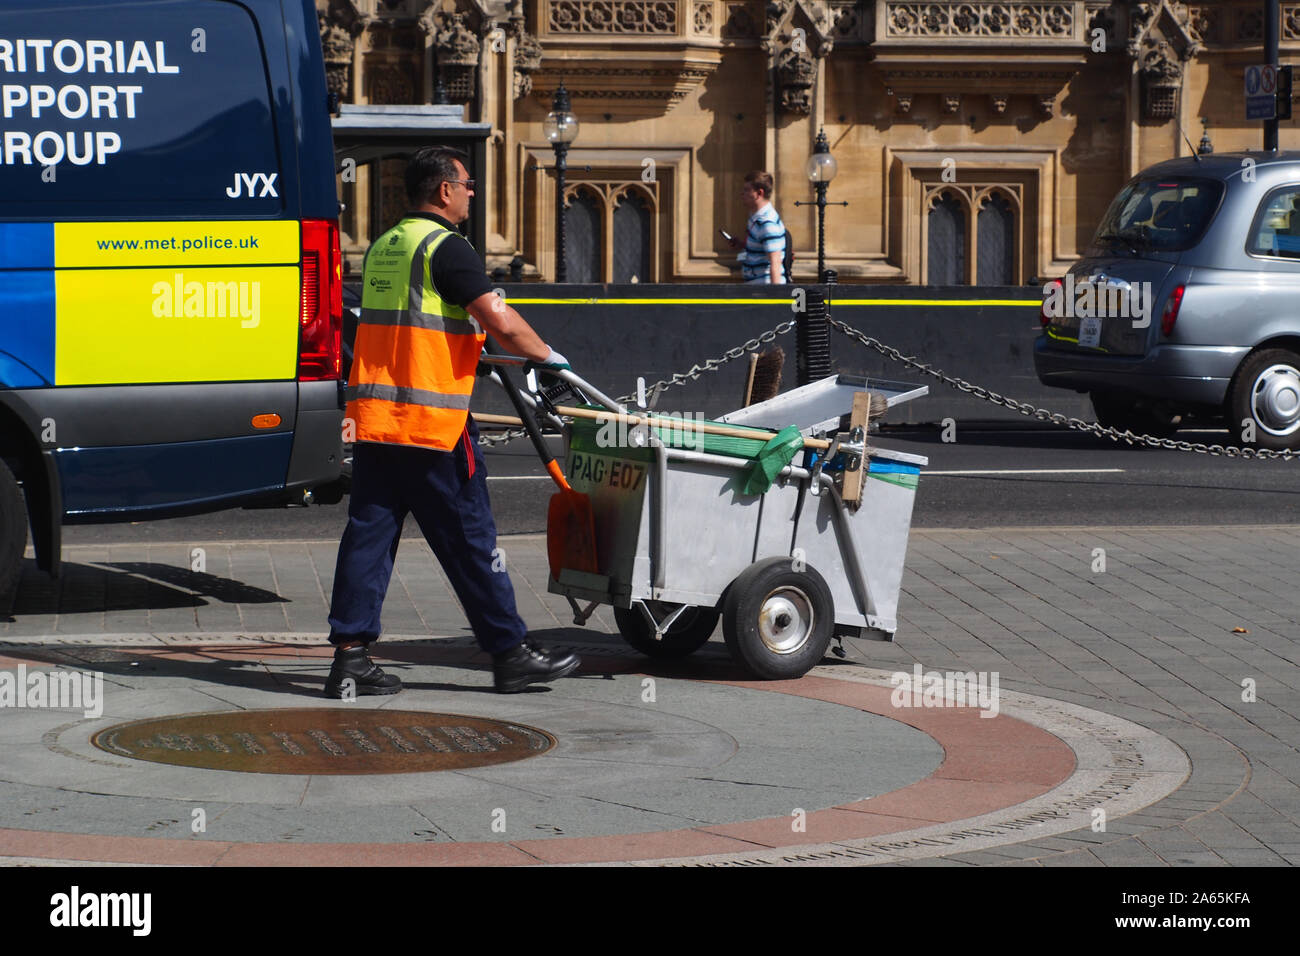 A road sweeper, street cleaner, pushing his trolley past the Houses of Parliament, Westminster,London, wearing a hi-viz jacketand two vehicles in view Stock Photo